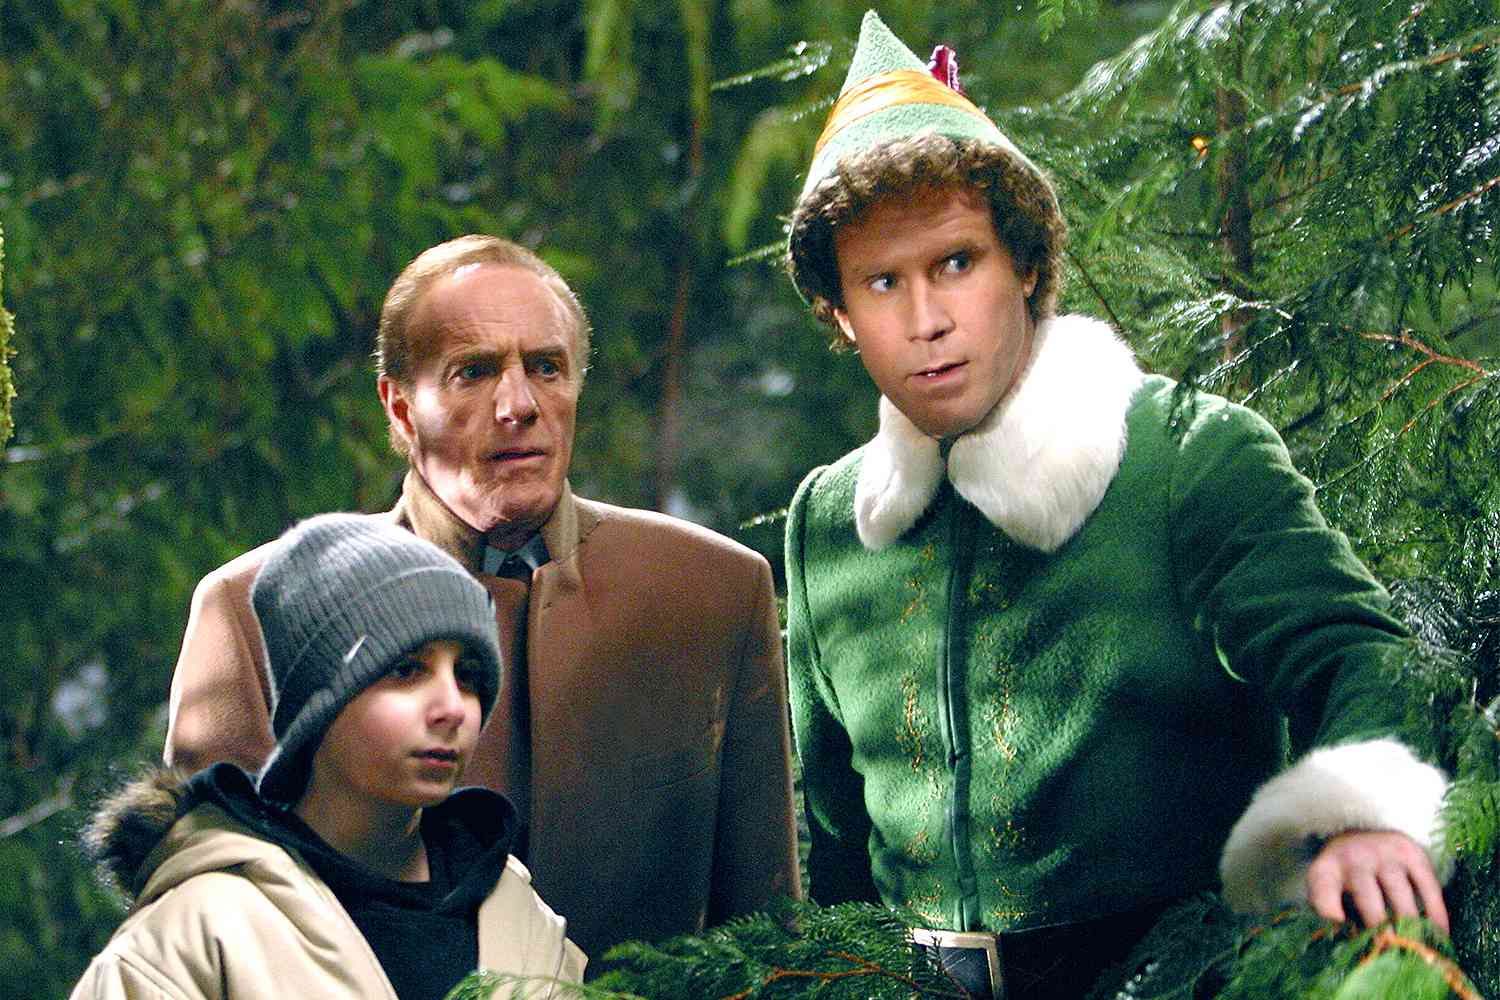 Will Ferrell Says Late James Caan Was 'Truly Annoyed' with Him While Filming 'Elf': 'I Drove Him Crazy'